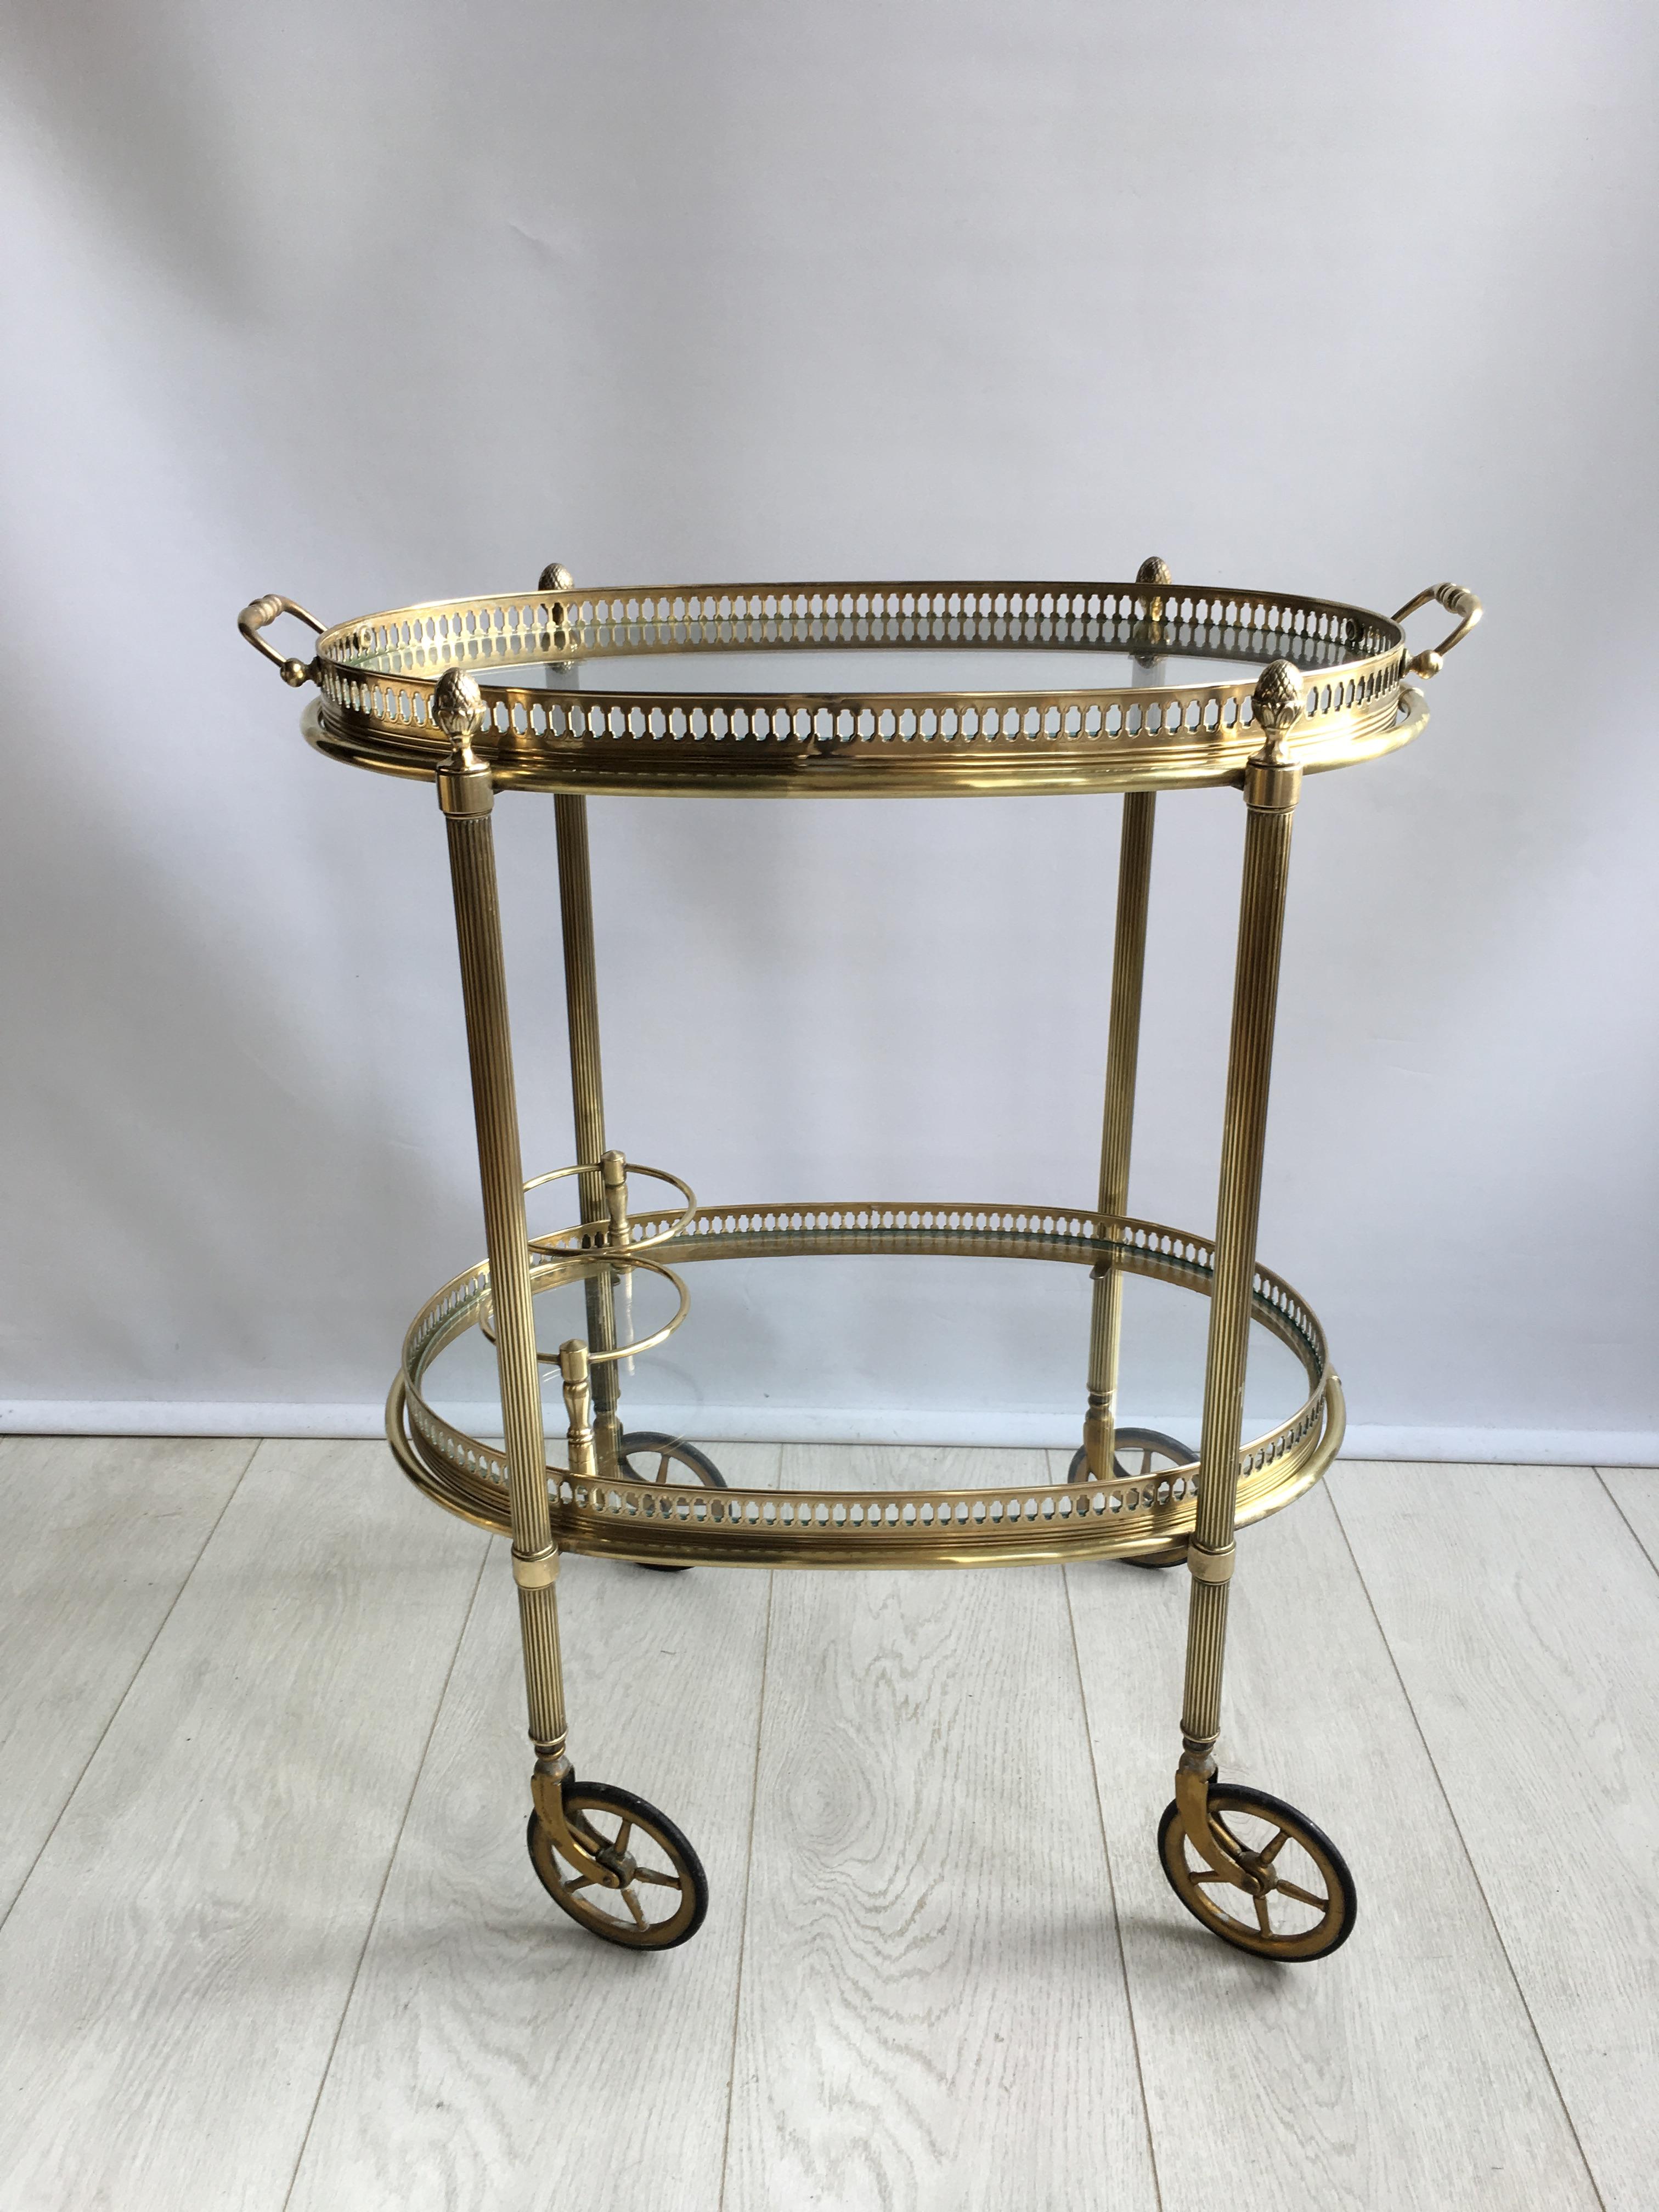 Attractive vintage drinks trolley from France, circa 1950.

Polished brass frame with lift off top tray and bottle holder to lower tier

Perfect for smaller spaces

Measures: Overall dims 56cm wide, 33cm deep and 65cm tall (62cm to glass).